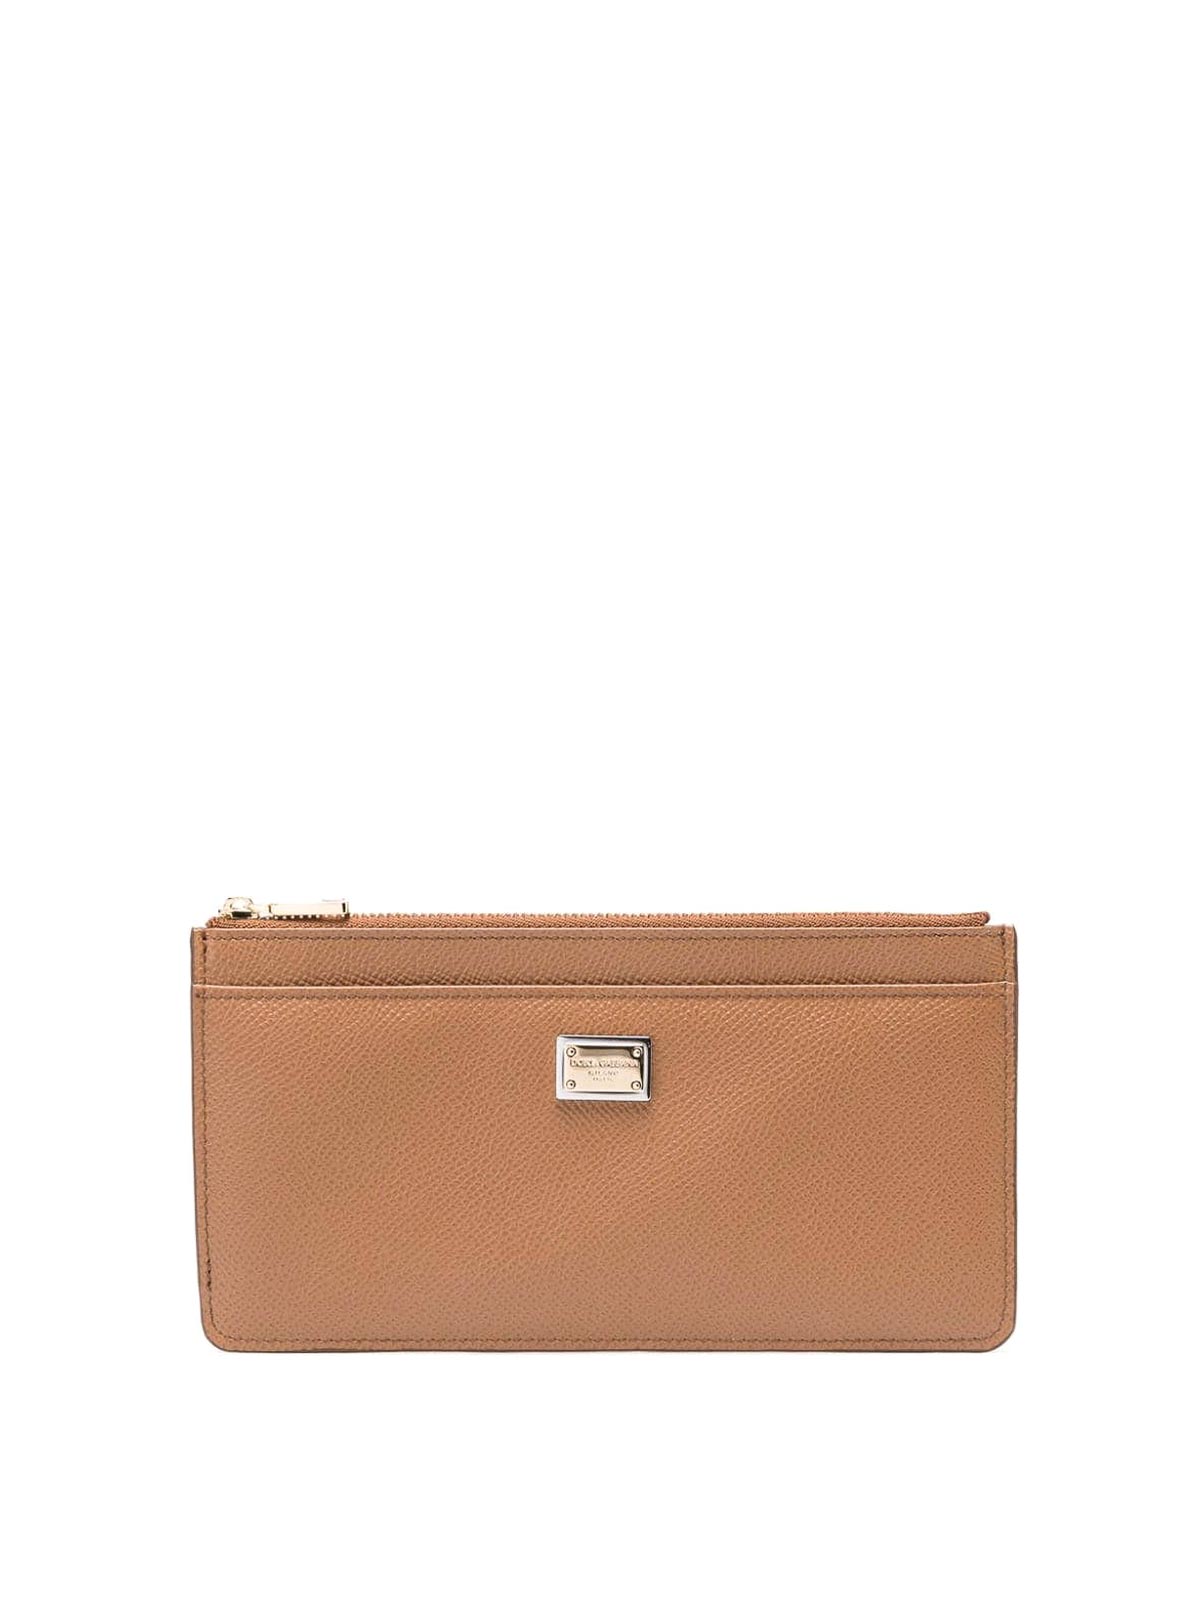 Dolce & Gabbana Leather Zipped Card Case In Brown